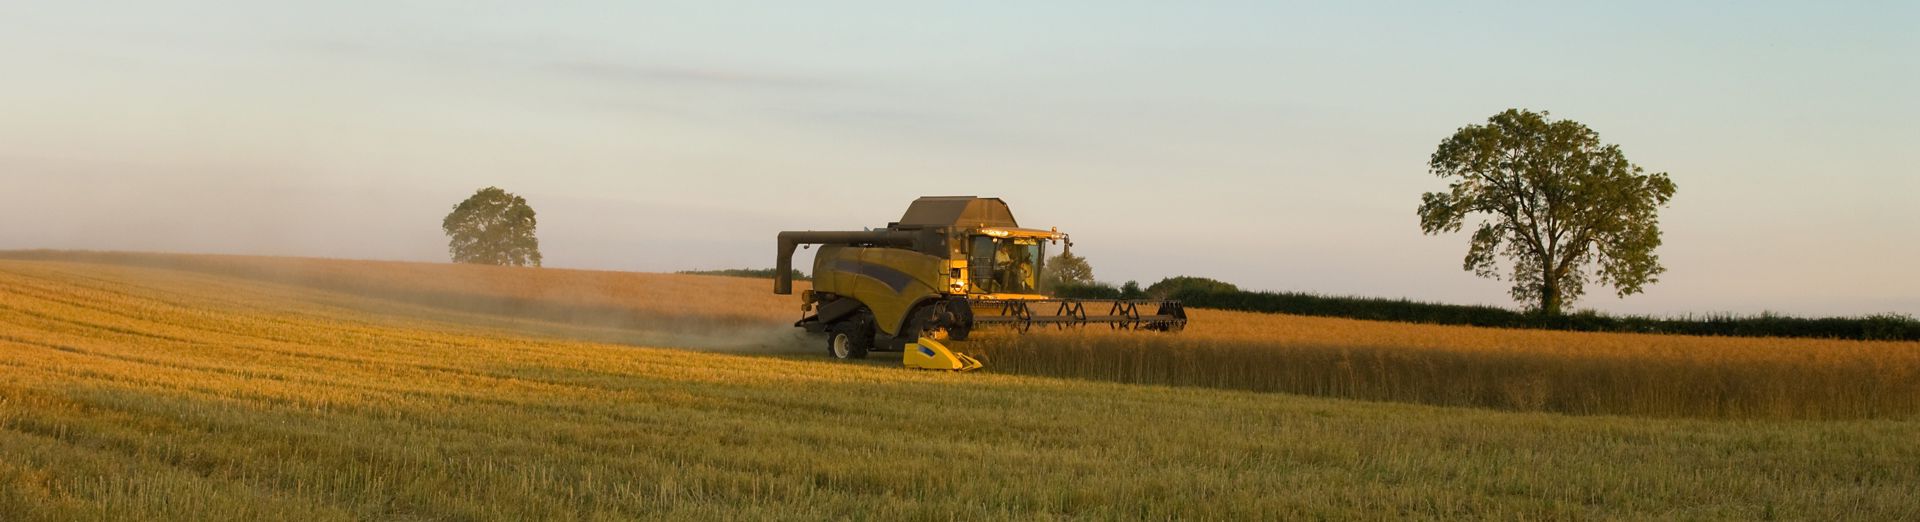 Image of a combine in a wheat field, representing the agribusiness industry